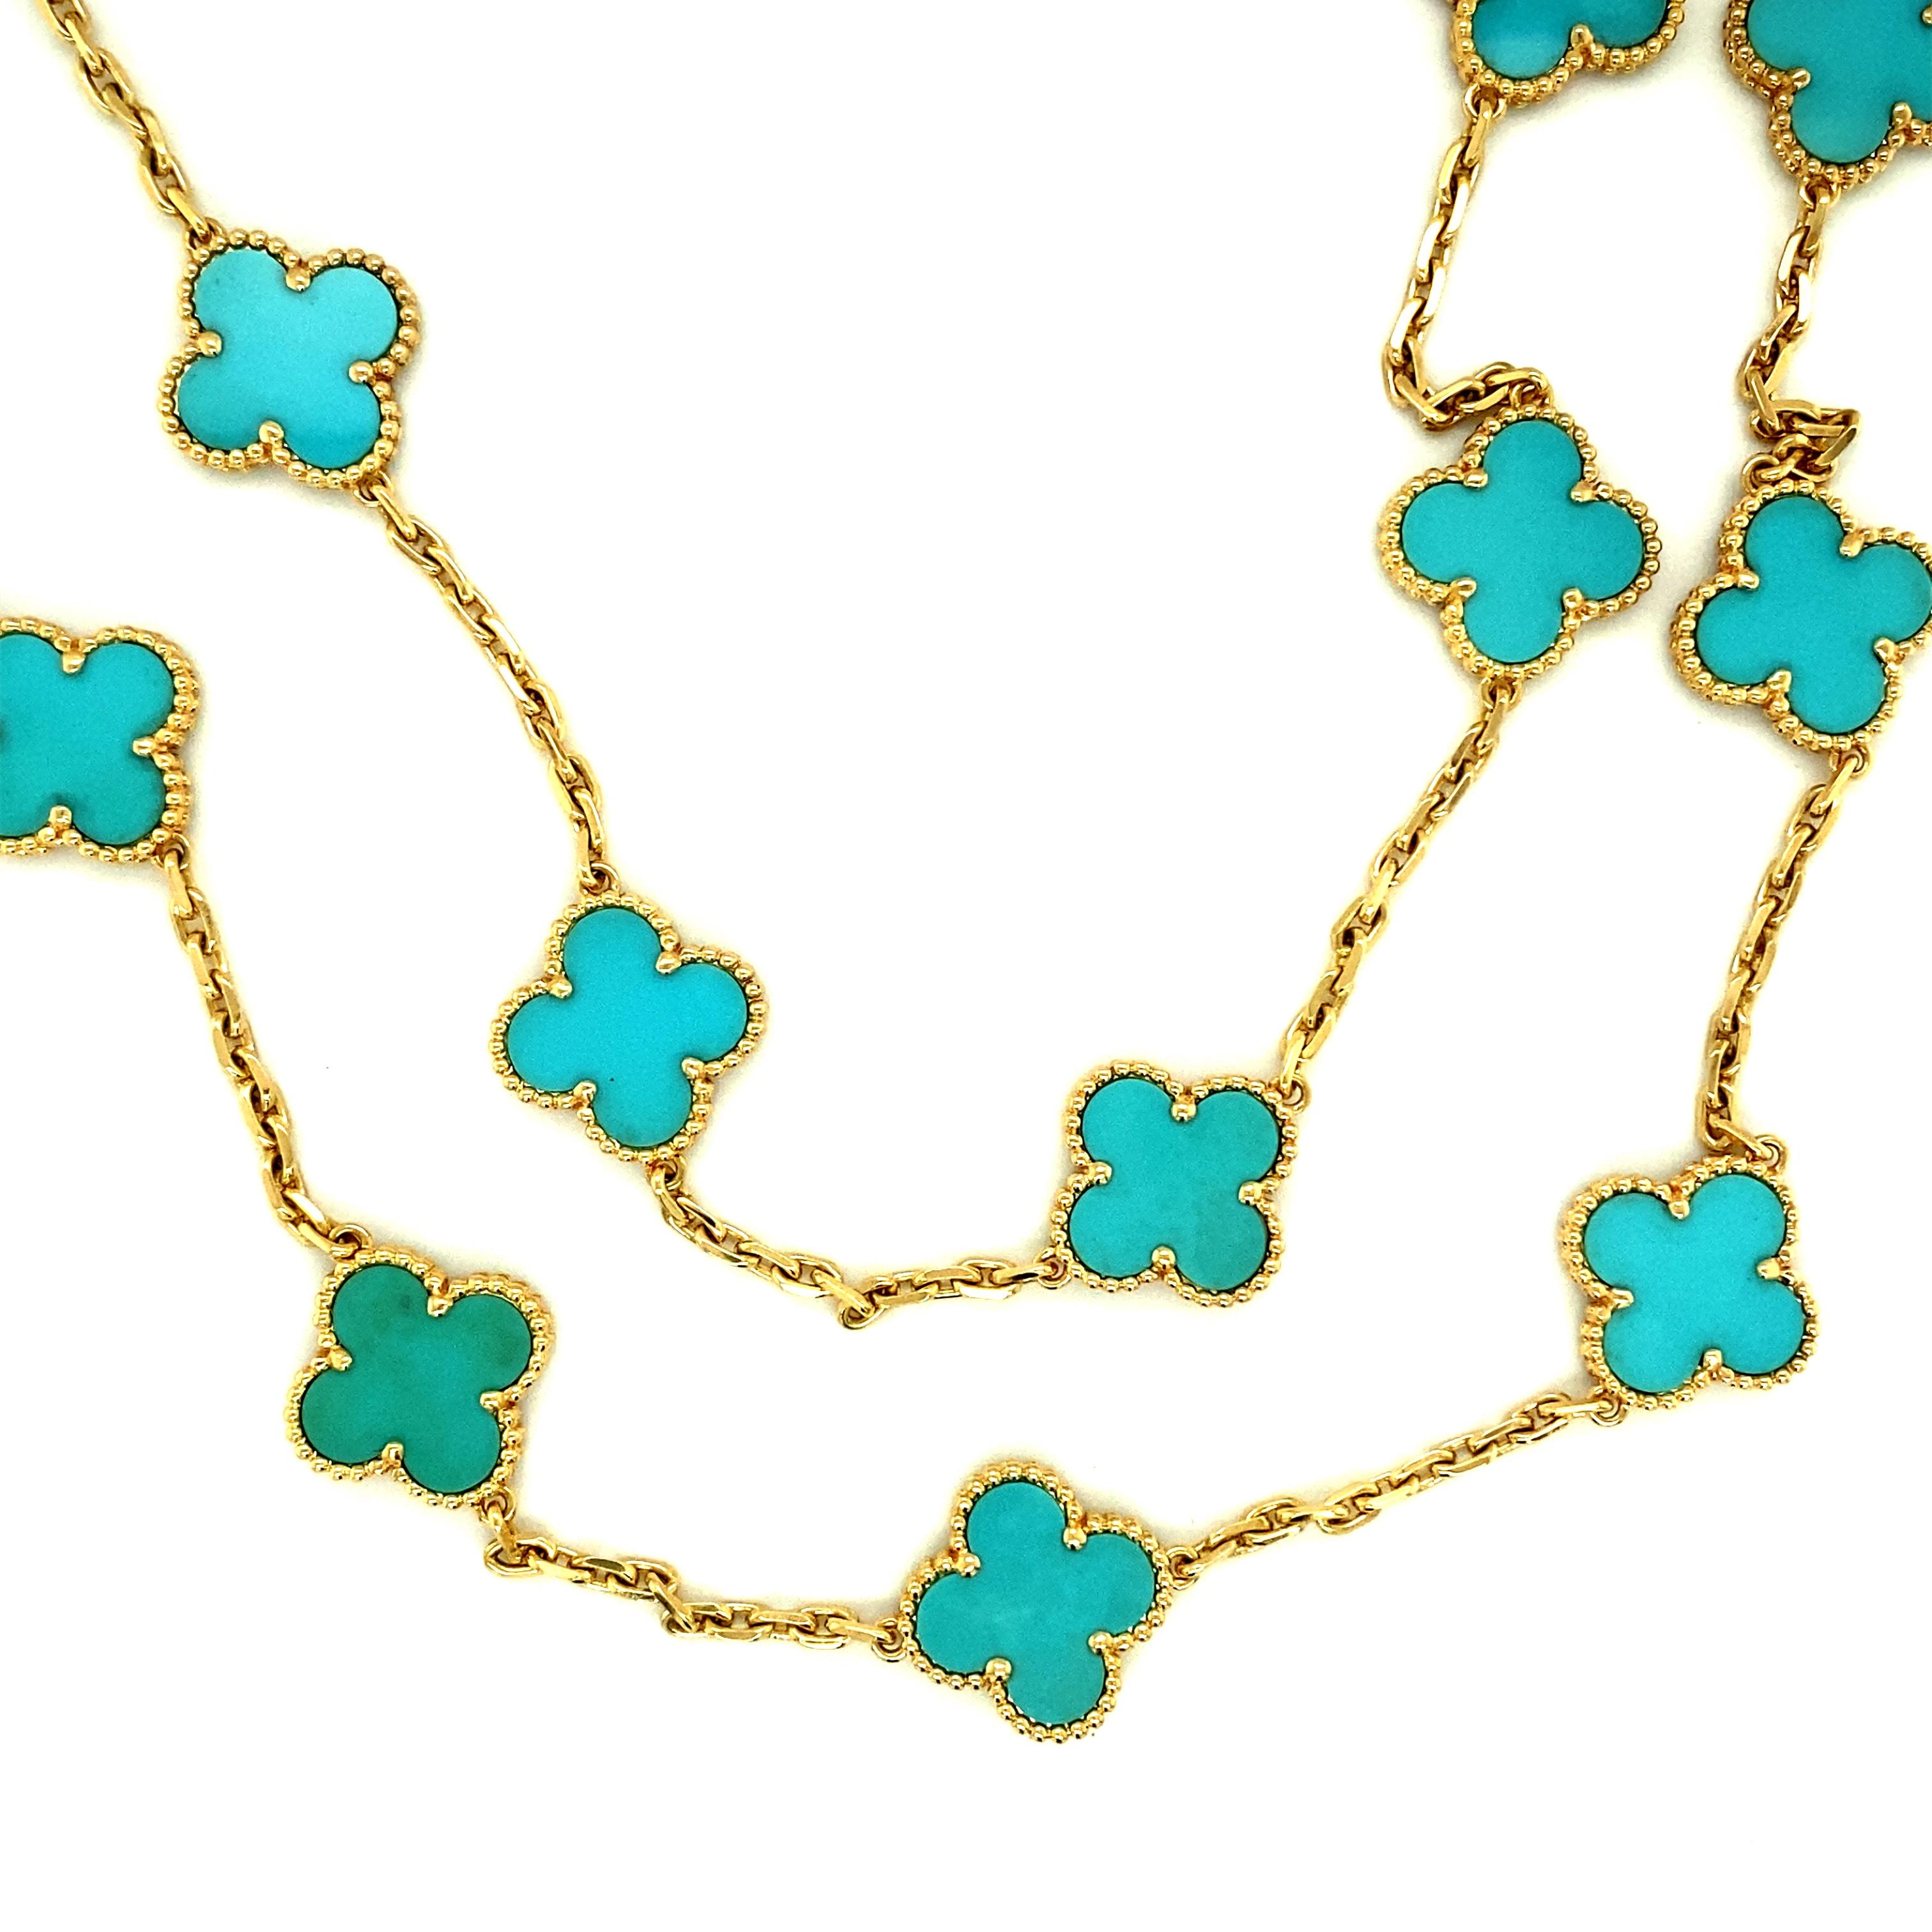  Van Cleef & Arpels original vintage Alhambra necklace set with 20 turquoise motifs mounted in 18kt Yellow Gold. 
The necklace was made in France circa 2012. The necklace is in great condition. 
The necklace measures 33 1/2“ long. 
This beautiful